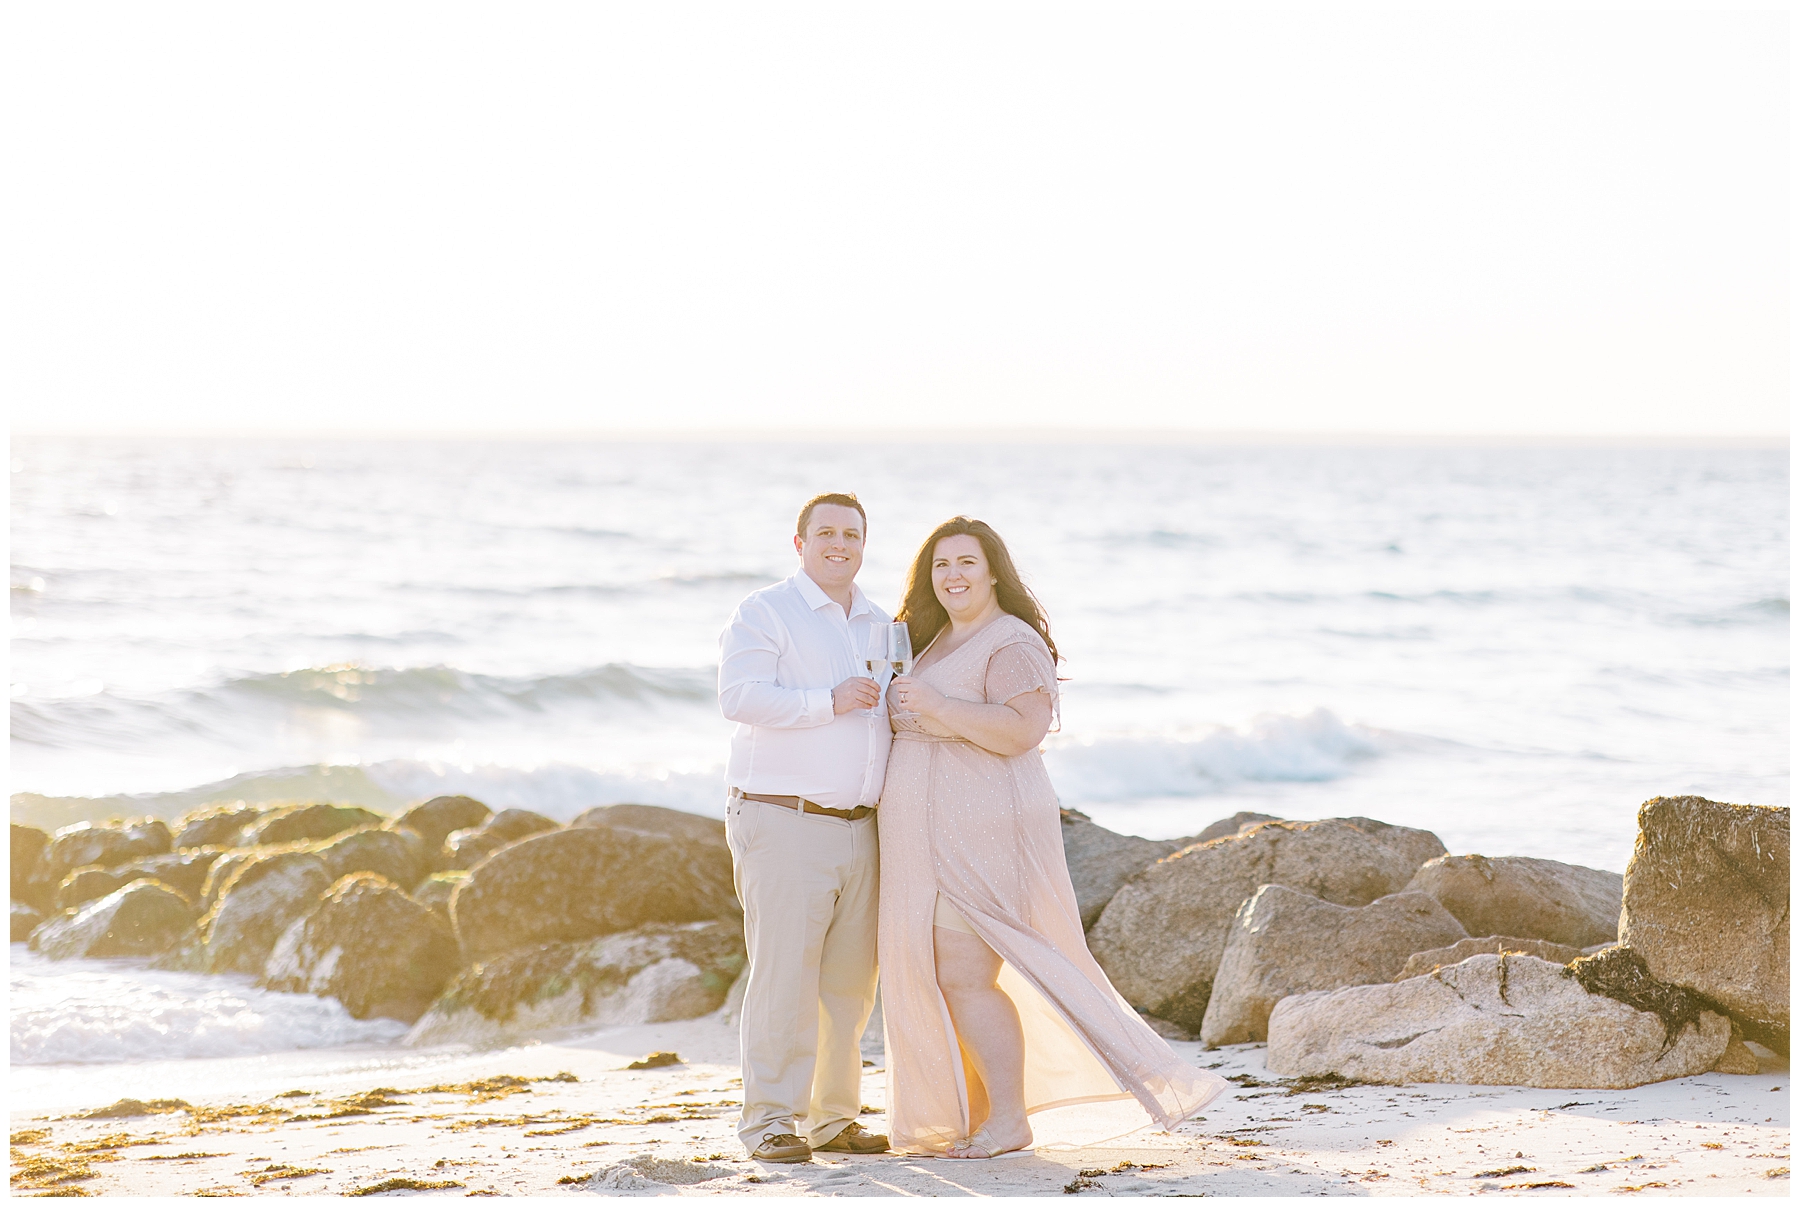 newly engaged couple celebrate on the beach during engagement session
